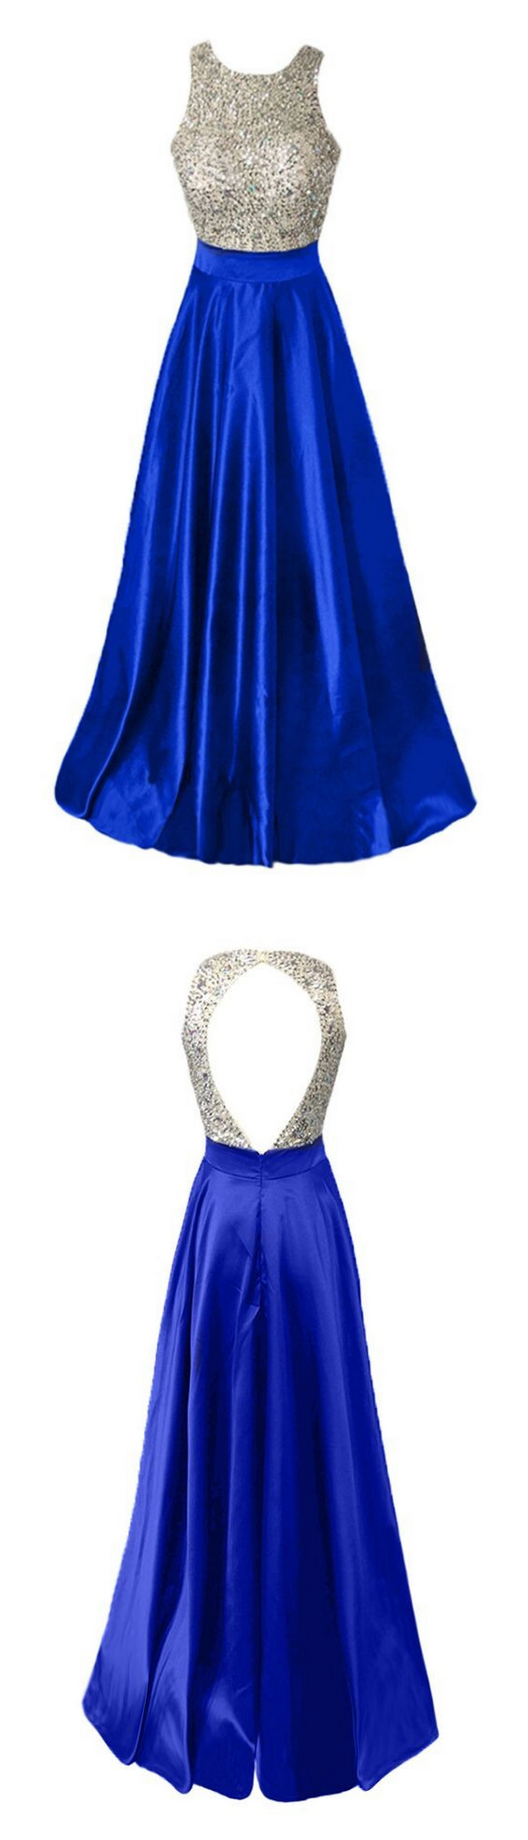 Royal Blue Stretch Satin Beaded Top Evening Dresses, Back Hole Prom Party Gowns